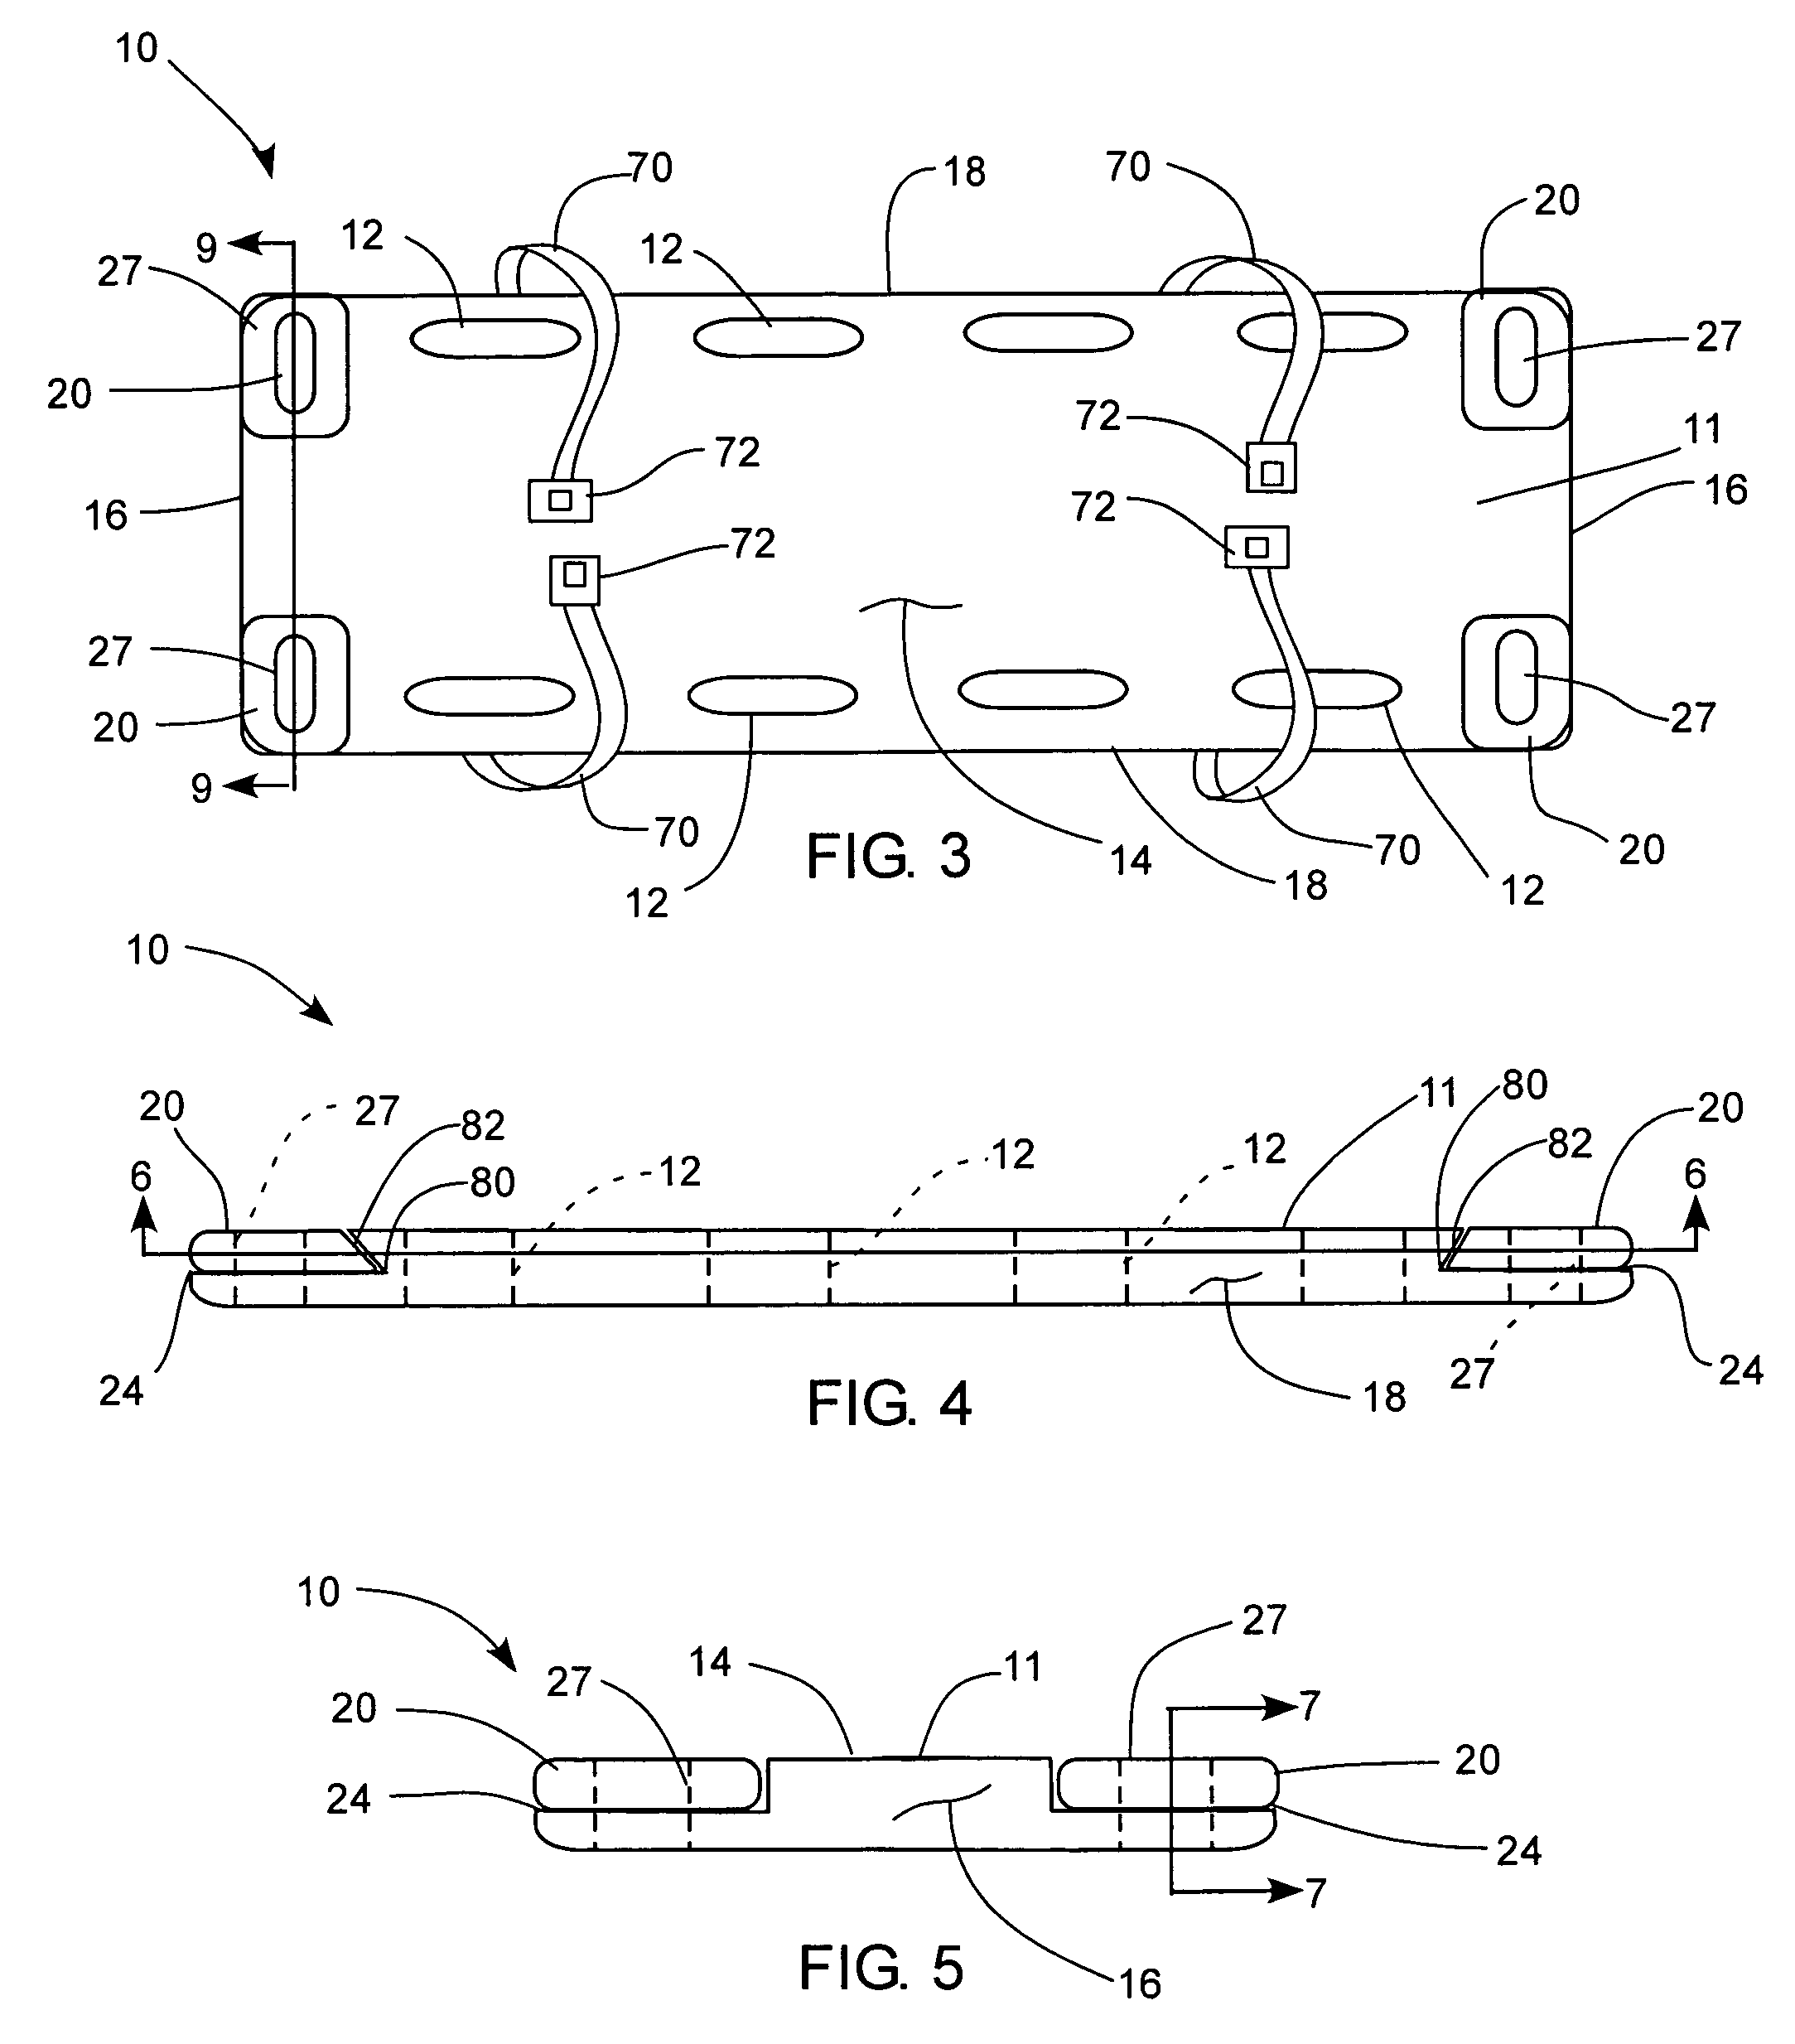 Patient transportation device with retractable, extendible handles to facilitate lifting of a patient